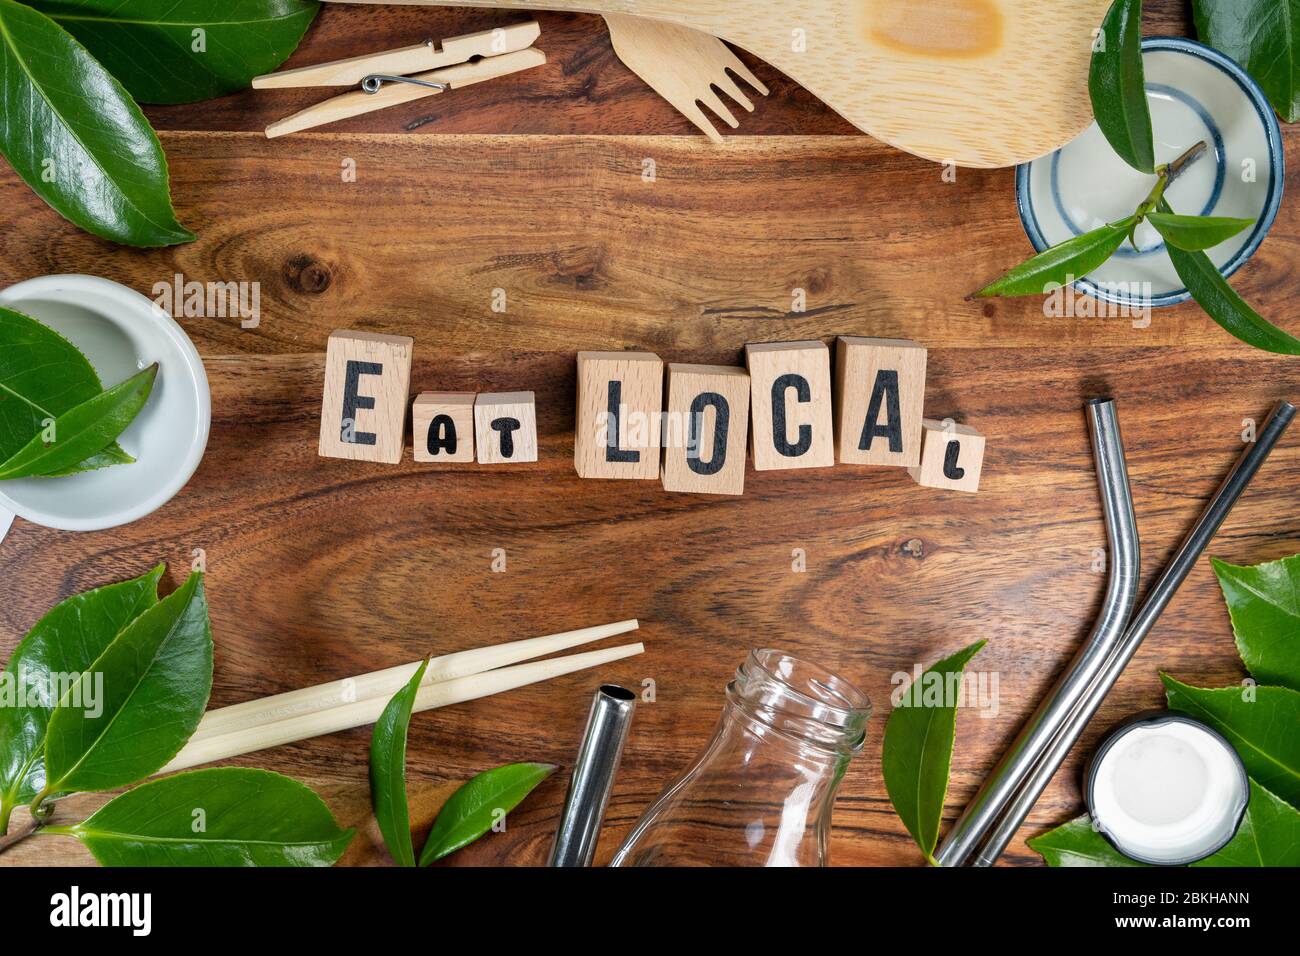 The wooden brick with words ' EAT LOCAL ' on wooden background. ECO concept with recycling symbol and leaves. Stock Photo